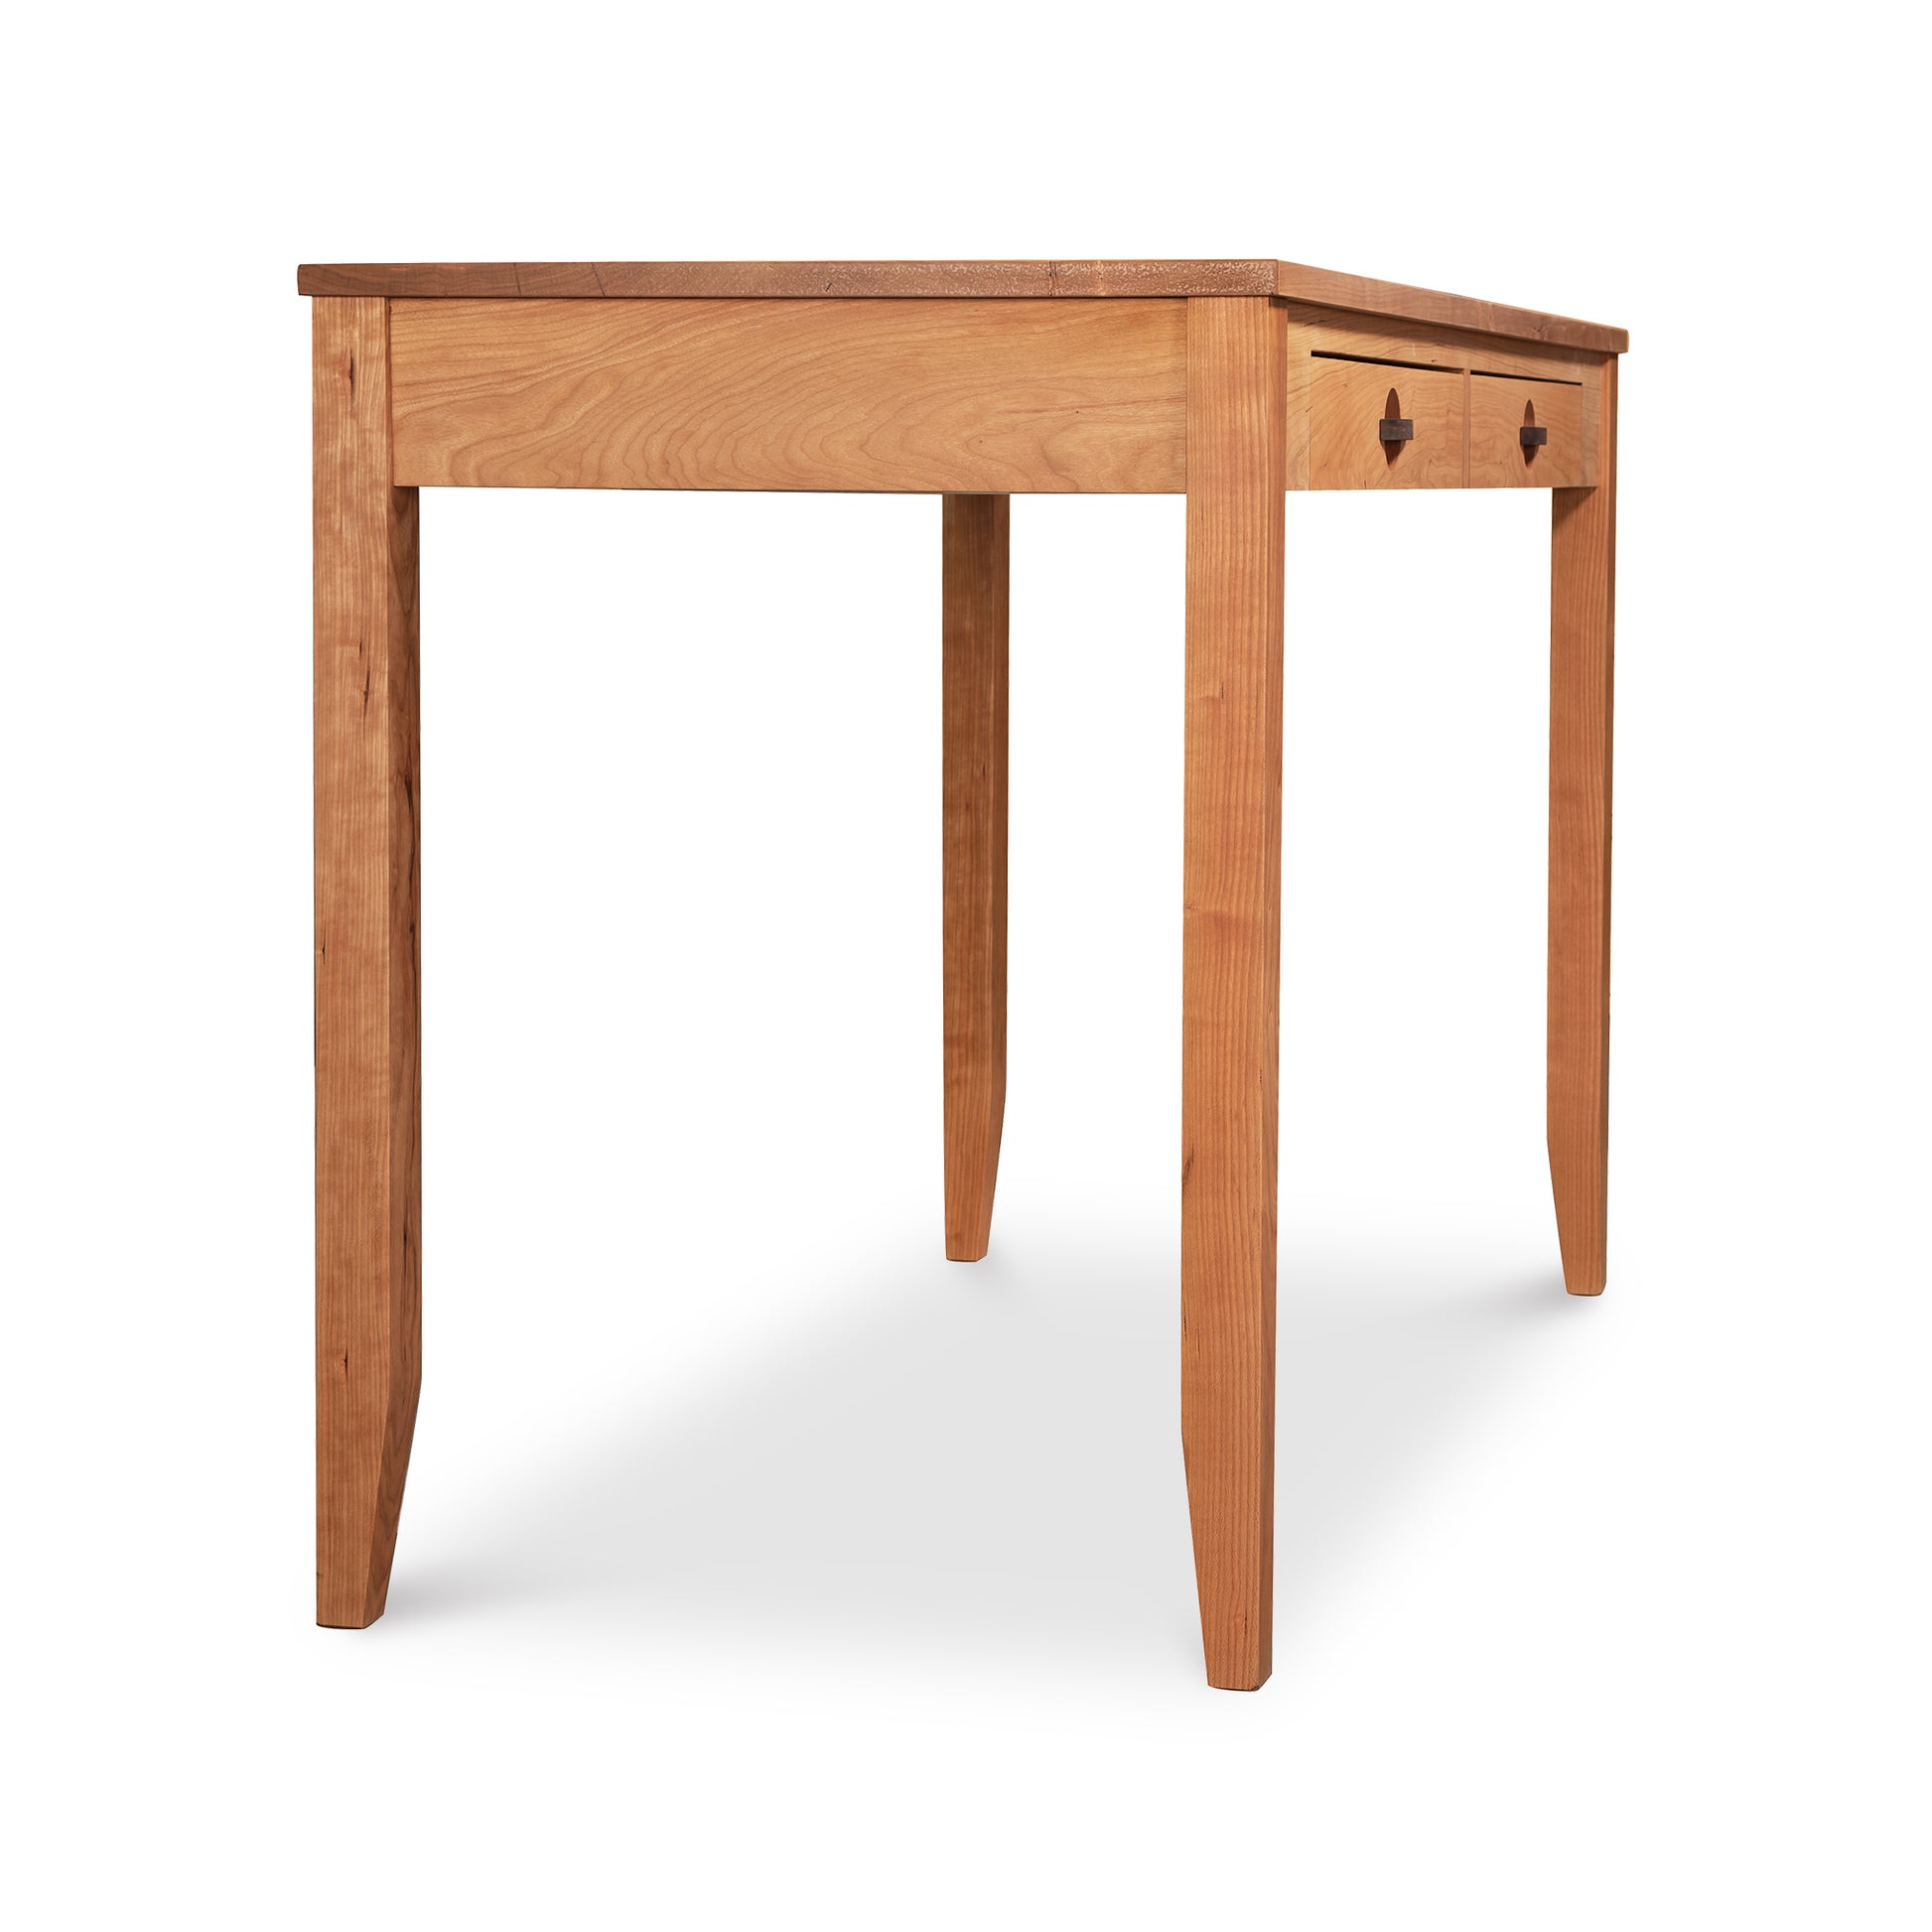 A Ryegate Writing Desk by Maple Corner Woodworks with tapered legs and two drawers, isolated on a white background.